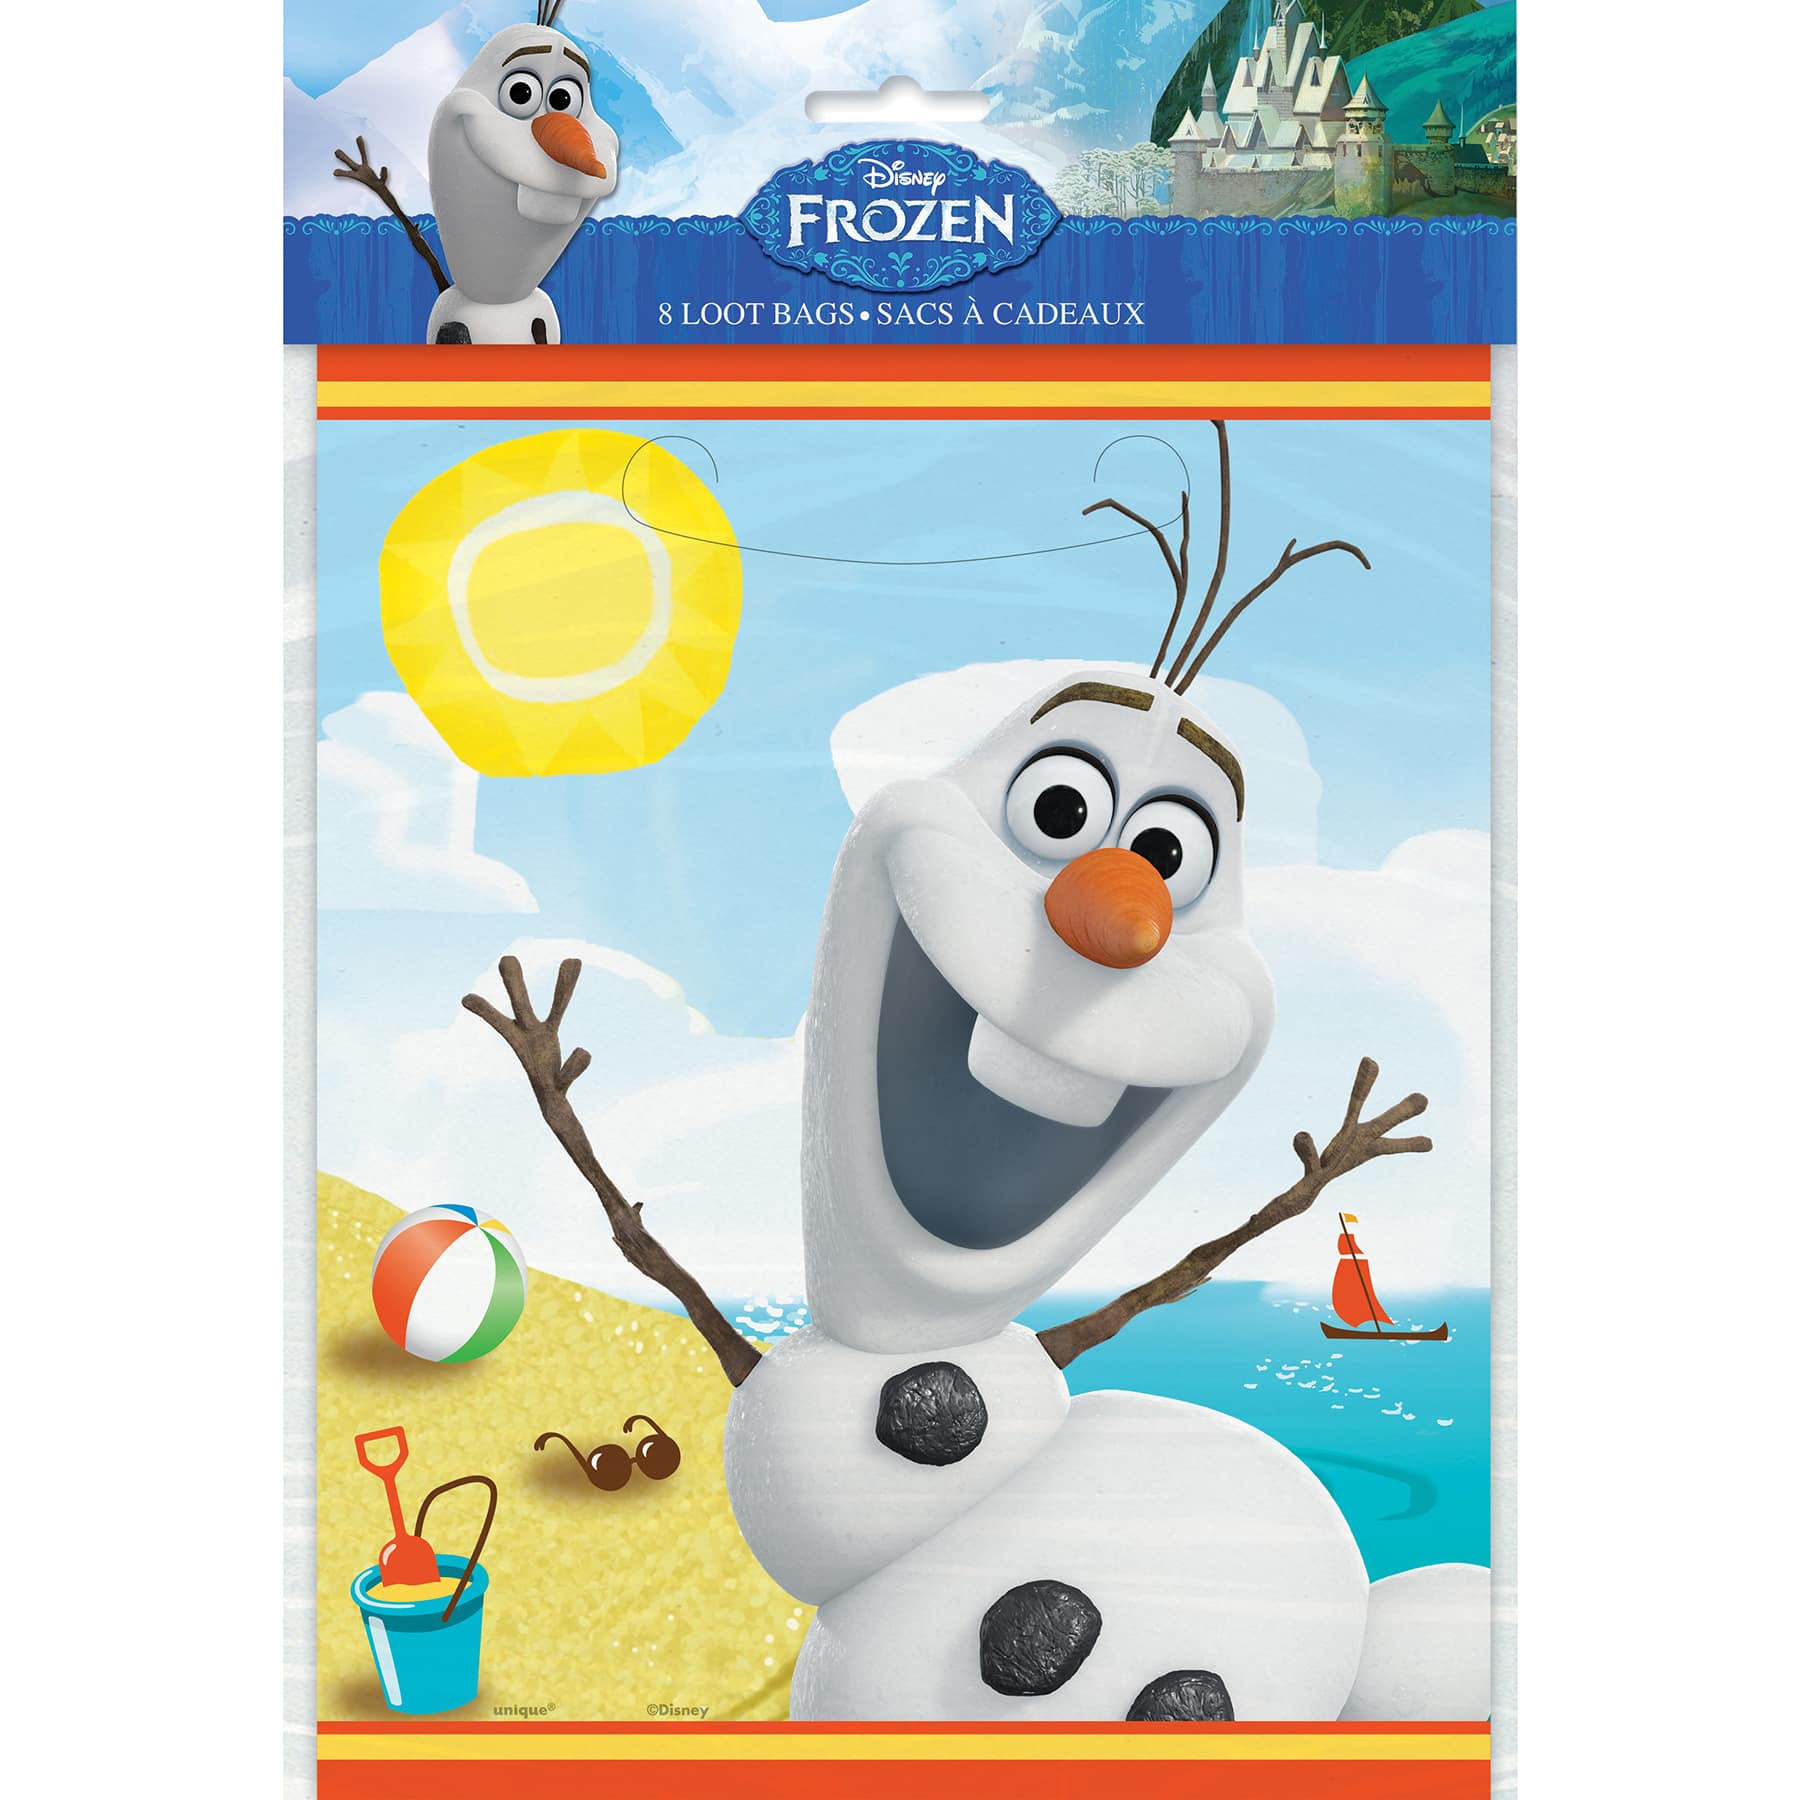 Disney Frozen Olaf  I Love Summer  Premium Quality Party Favor Reusable Goodie Small Gift Bags 12 12 Bags